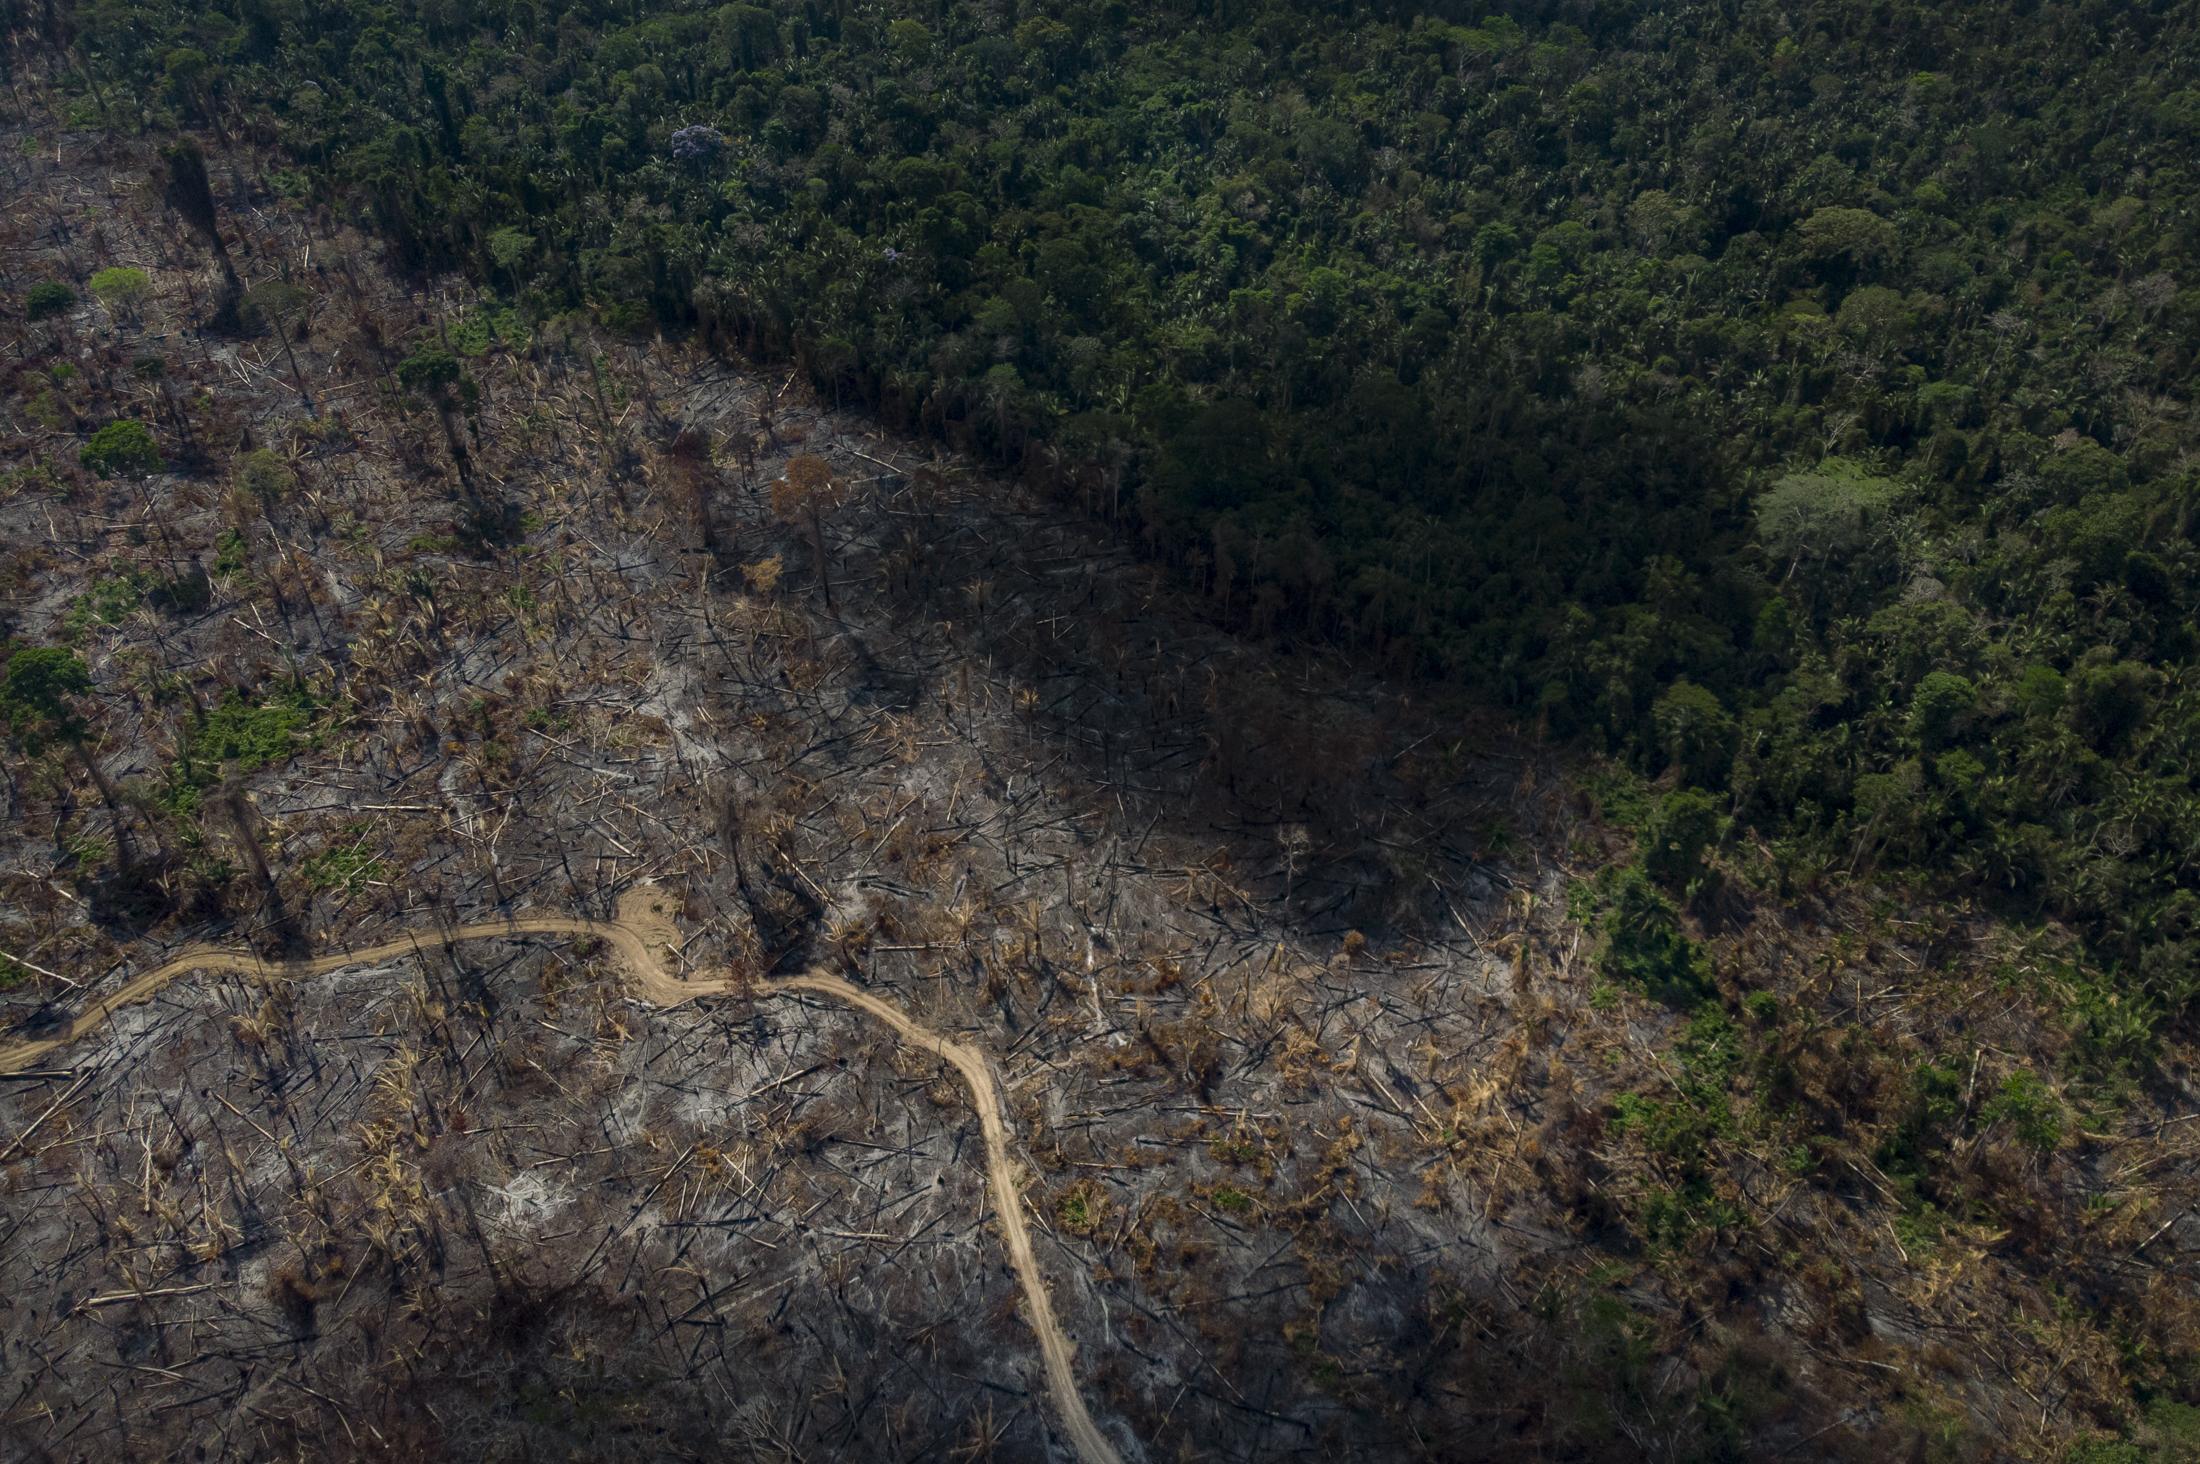 Aerial view of an area of 739 hectares of illegally burned Amazonian forest. This area of the forest is part of the Protected Indian Protected Landscape TI Cachoeira Seca that belongs to the Arara peoples. To deforest such a zone, 20 people and 6 sawchain work on site at 1000 reais per bushel for 2 months. The illegal work commissioned by farmers of the region, friends who would share the land. A runway is already ready to sow the seeds of pasture before the rainy weather arrives. A fine of one million two hundred thousand reais is envisaged for this type of environmental crime, but cases like that normally ends up by the farmer paying the sum of 5000 Reais in 5 parcels of 1000. Between the farmers who burned this forest, one is son of a local deputy.